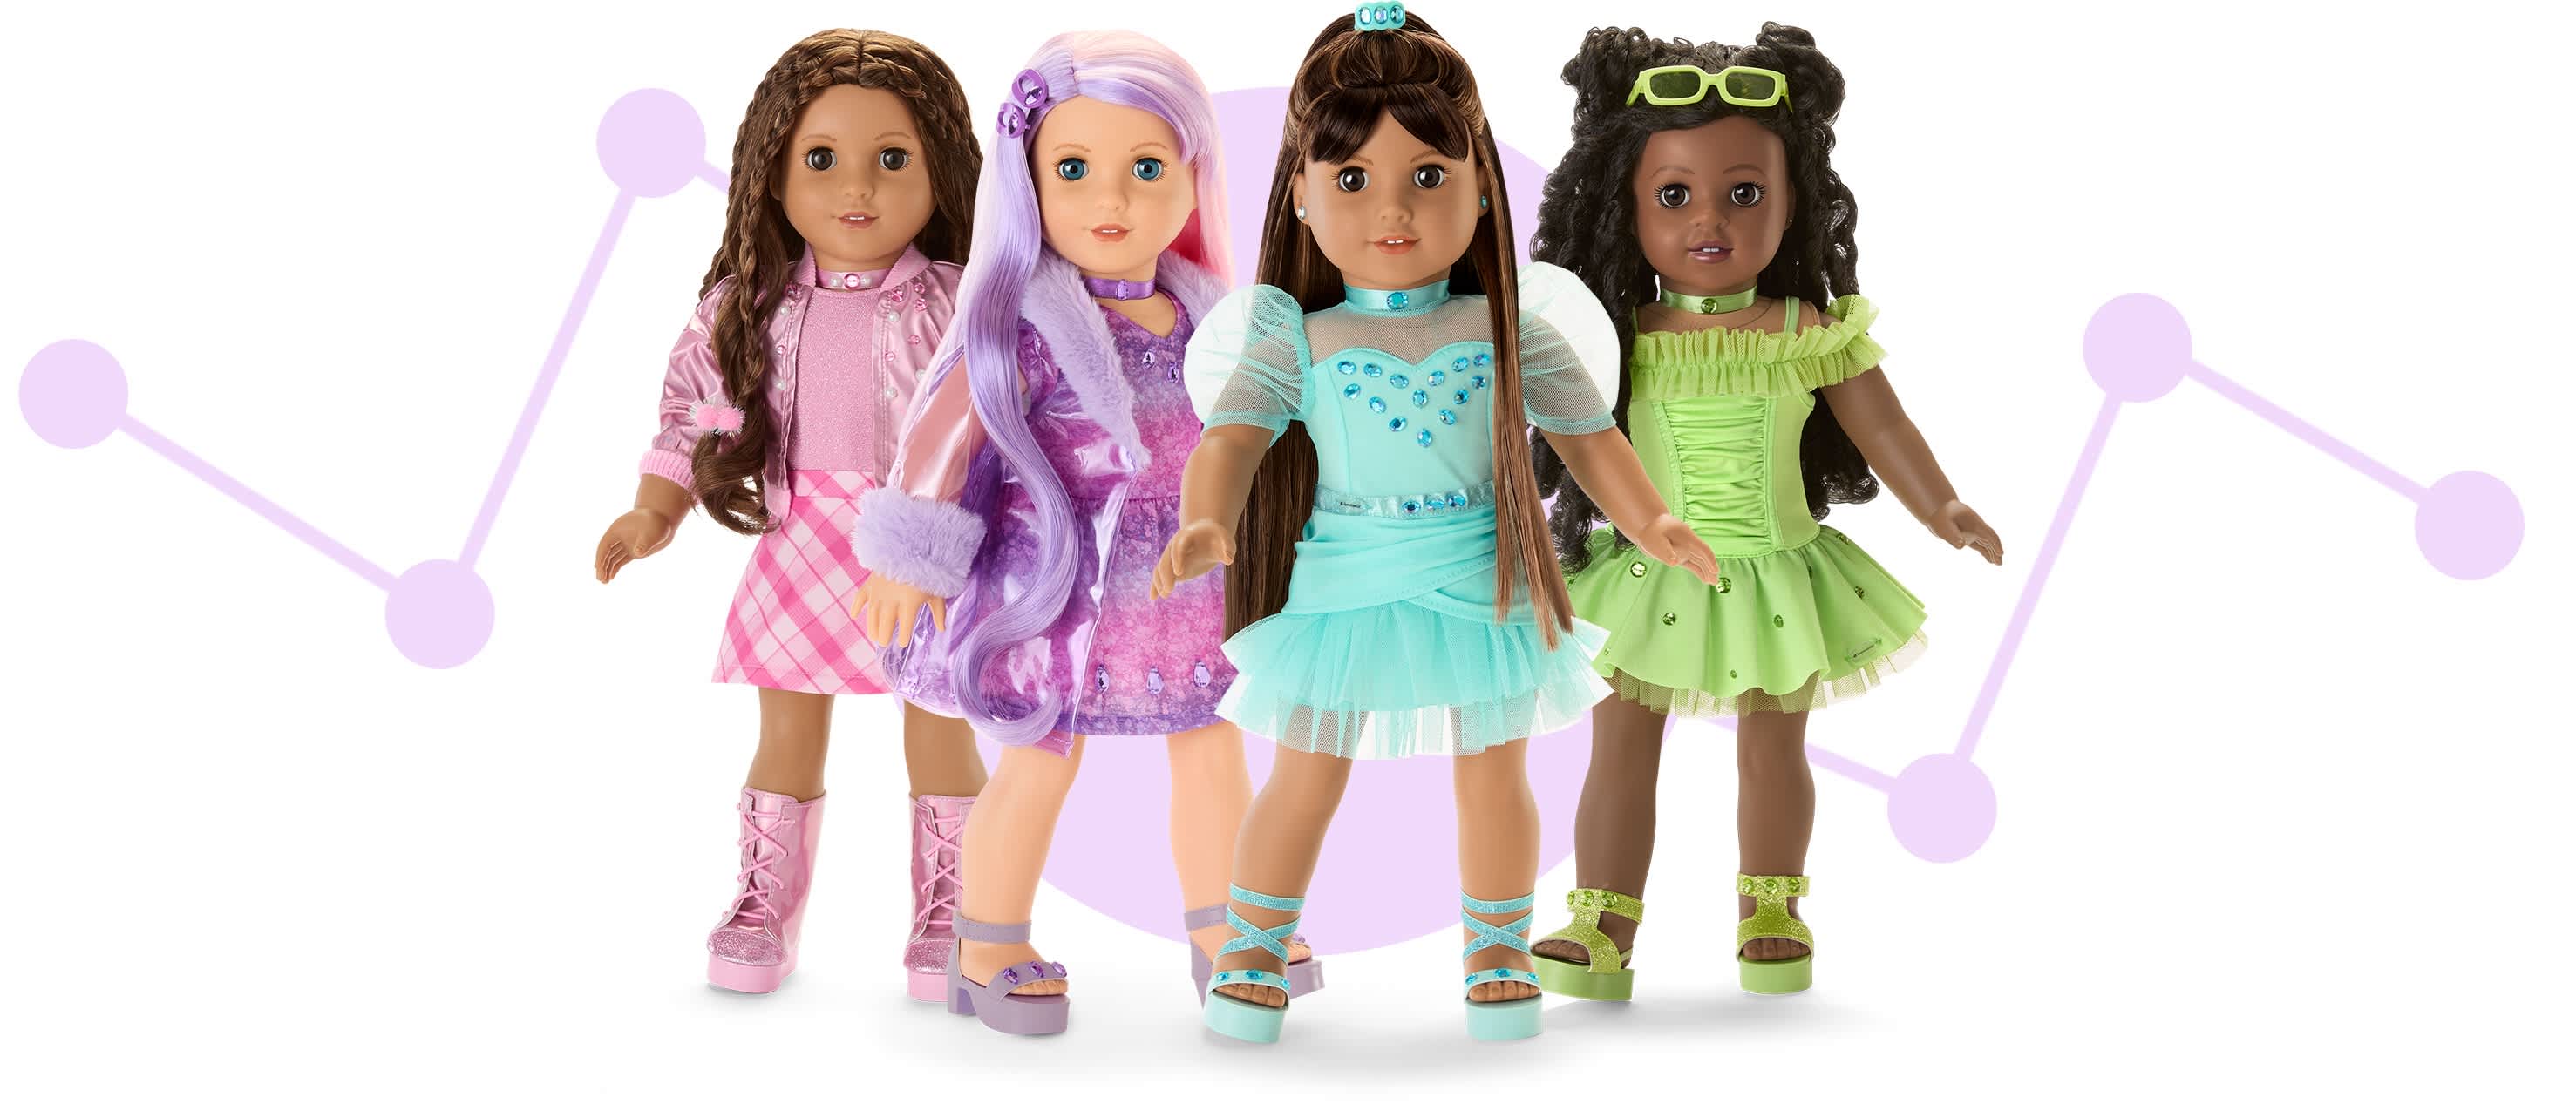 Image of dolls in their Birthstone outfits